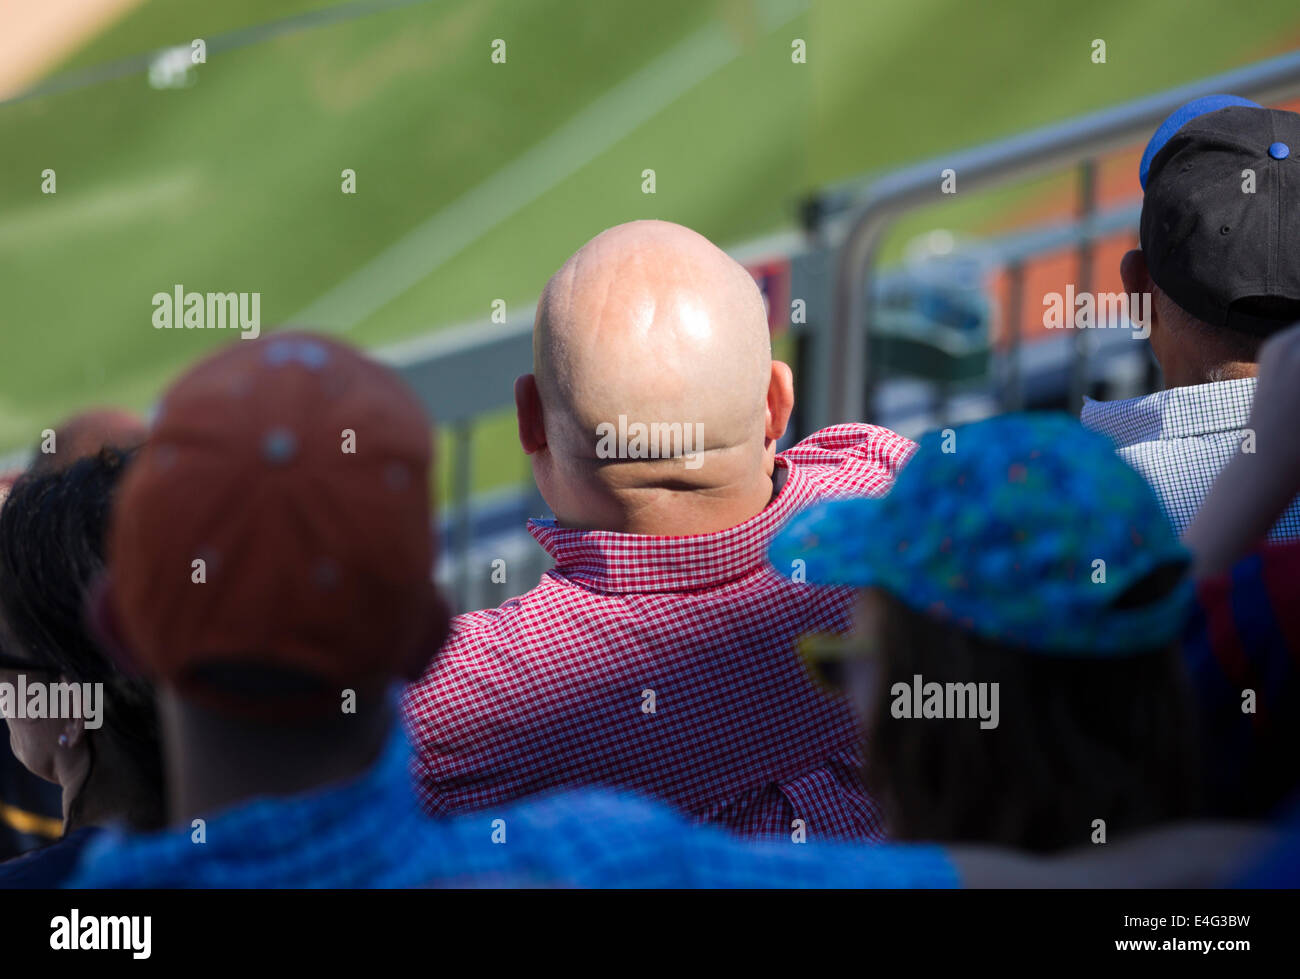 Man with shaved head at a baseball game Stock Photo